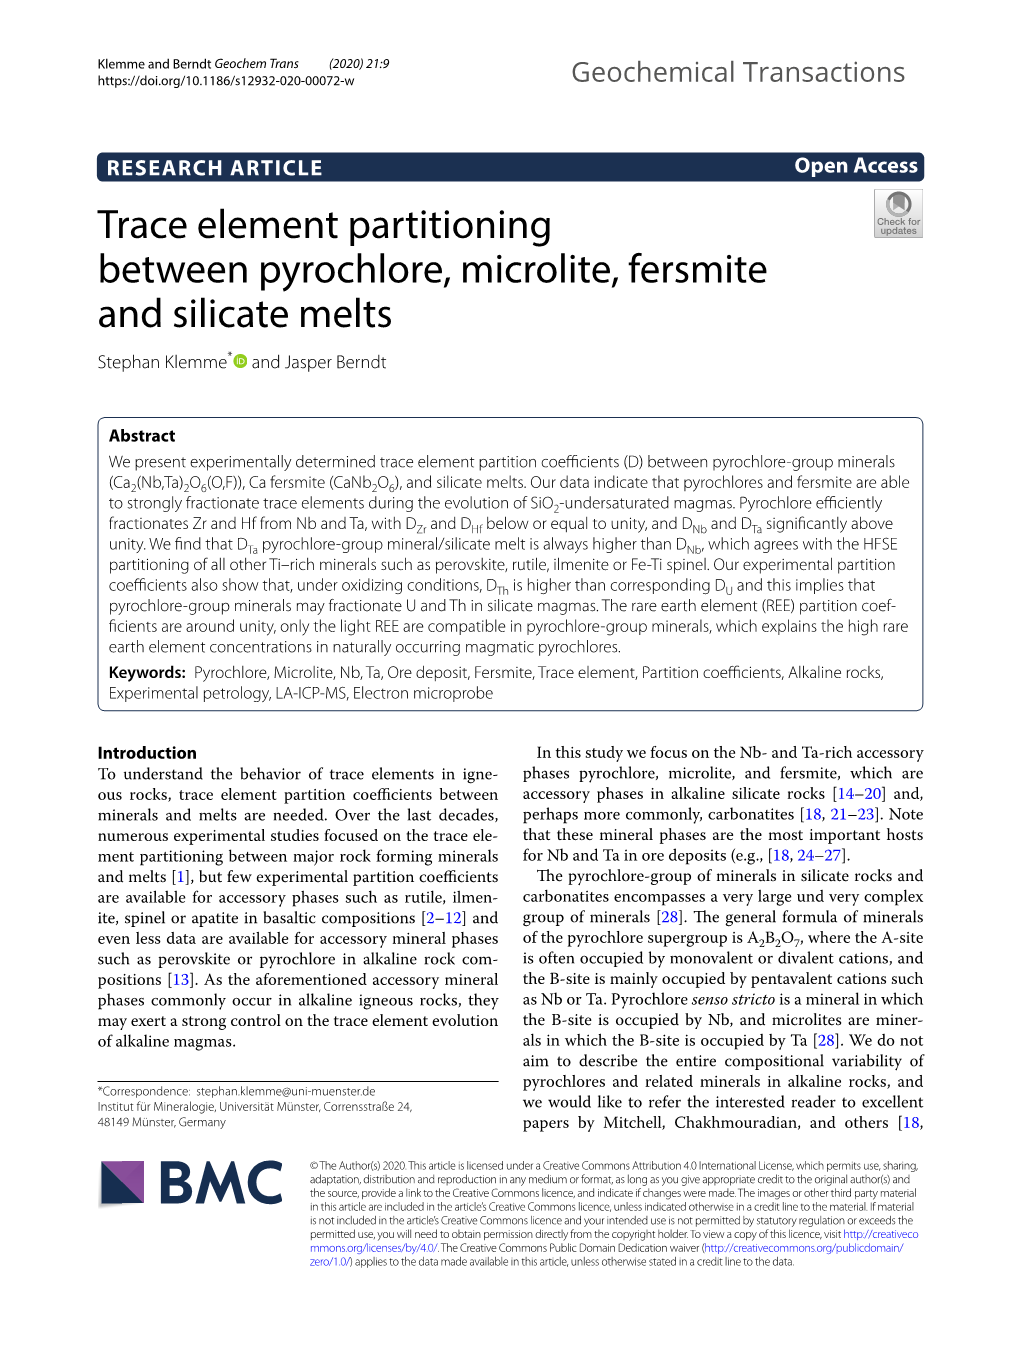 Trace Element Partitioning Between Pyrochlore, Microlite, Fersmite and Silicate Melts Stephan Klemme* and Jasper Berndt